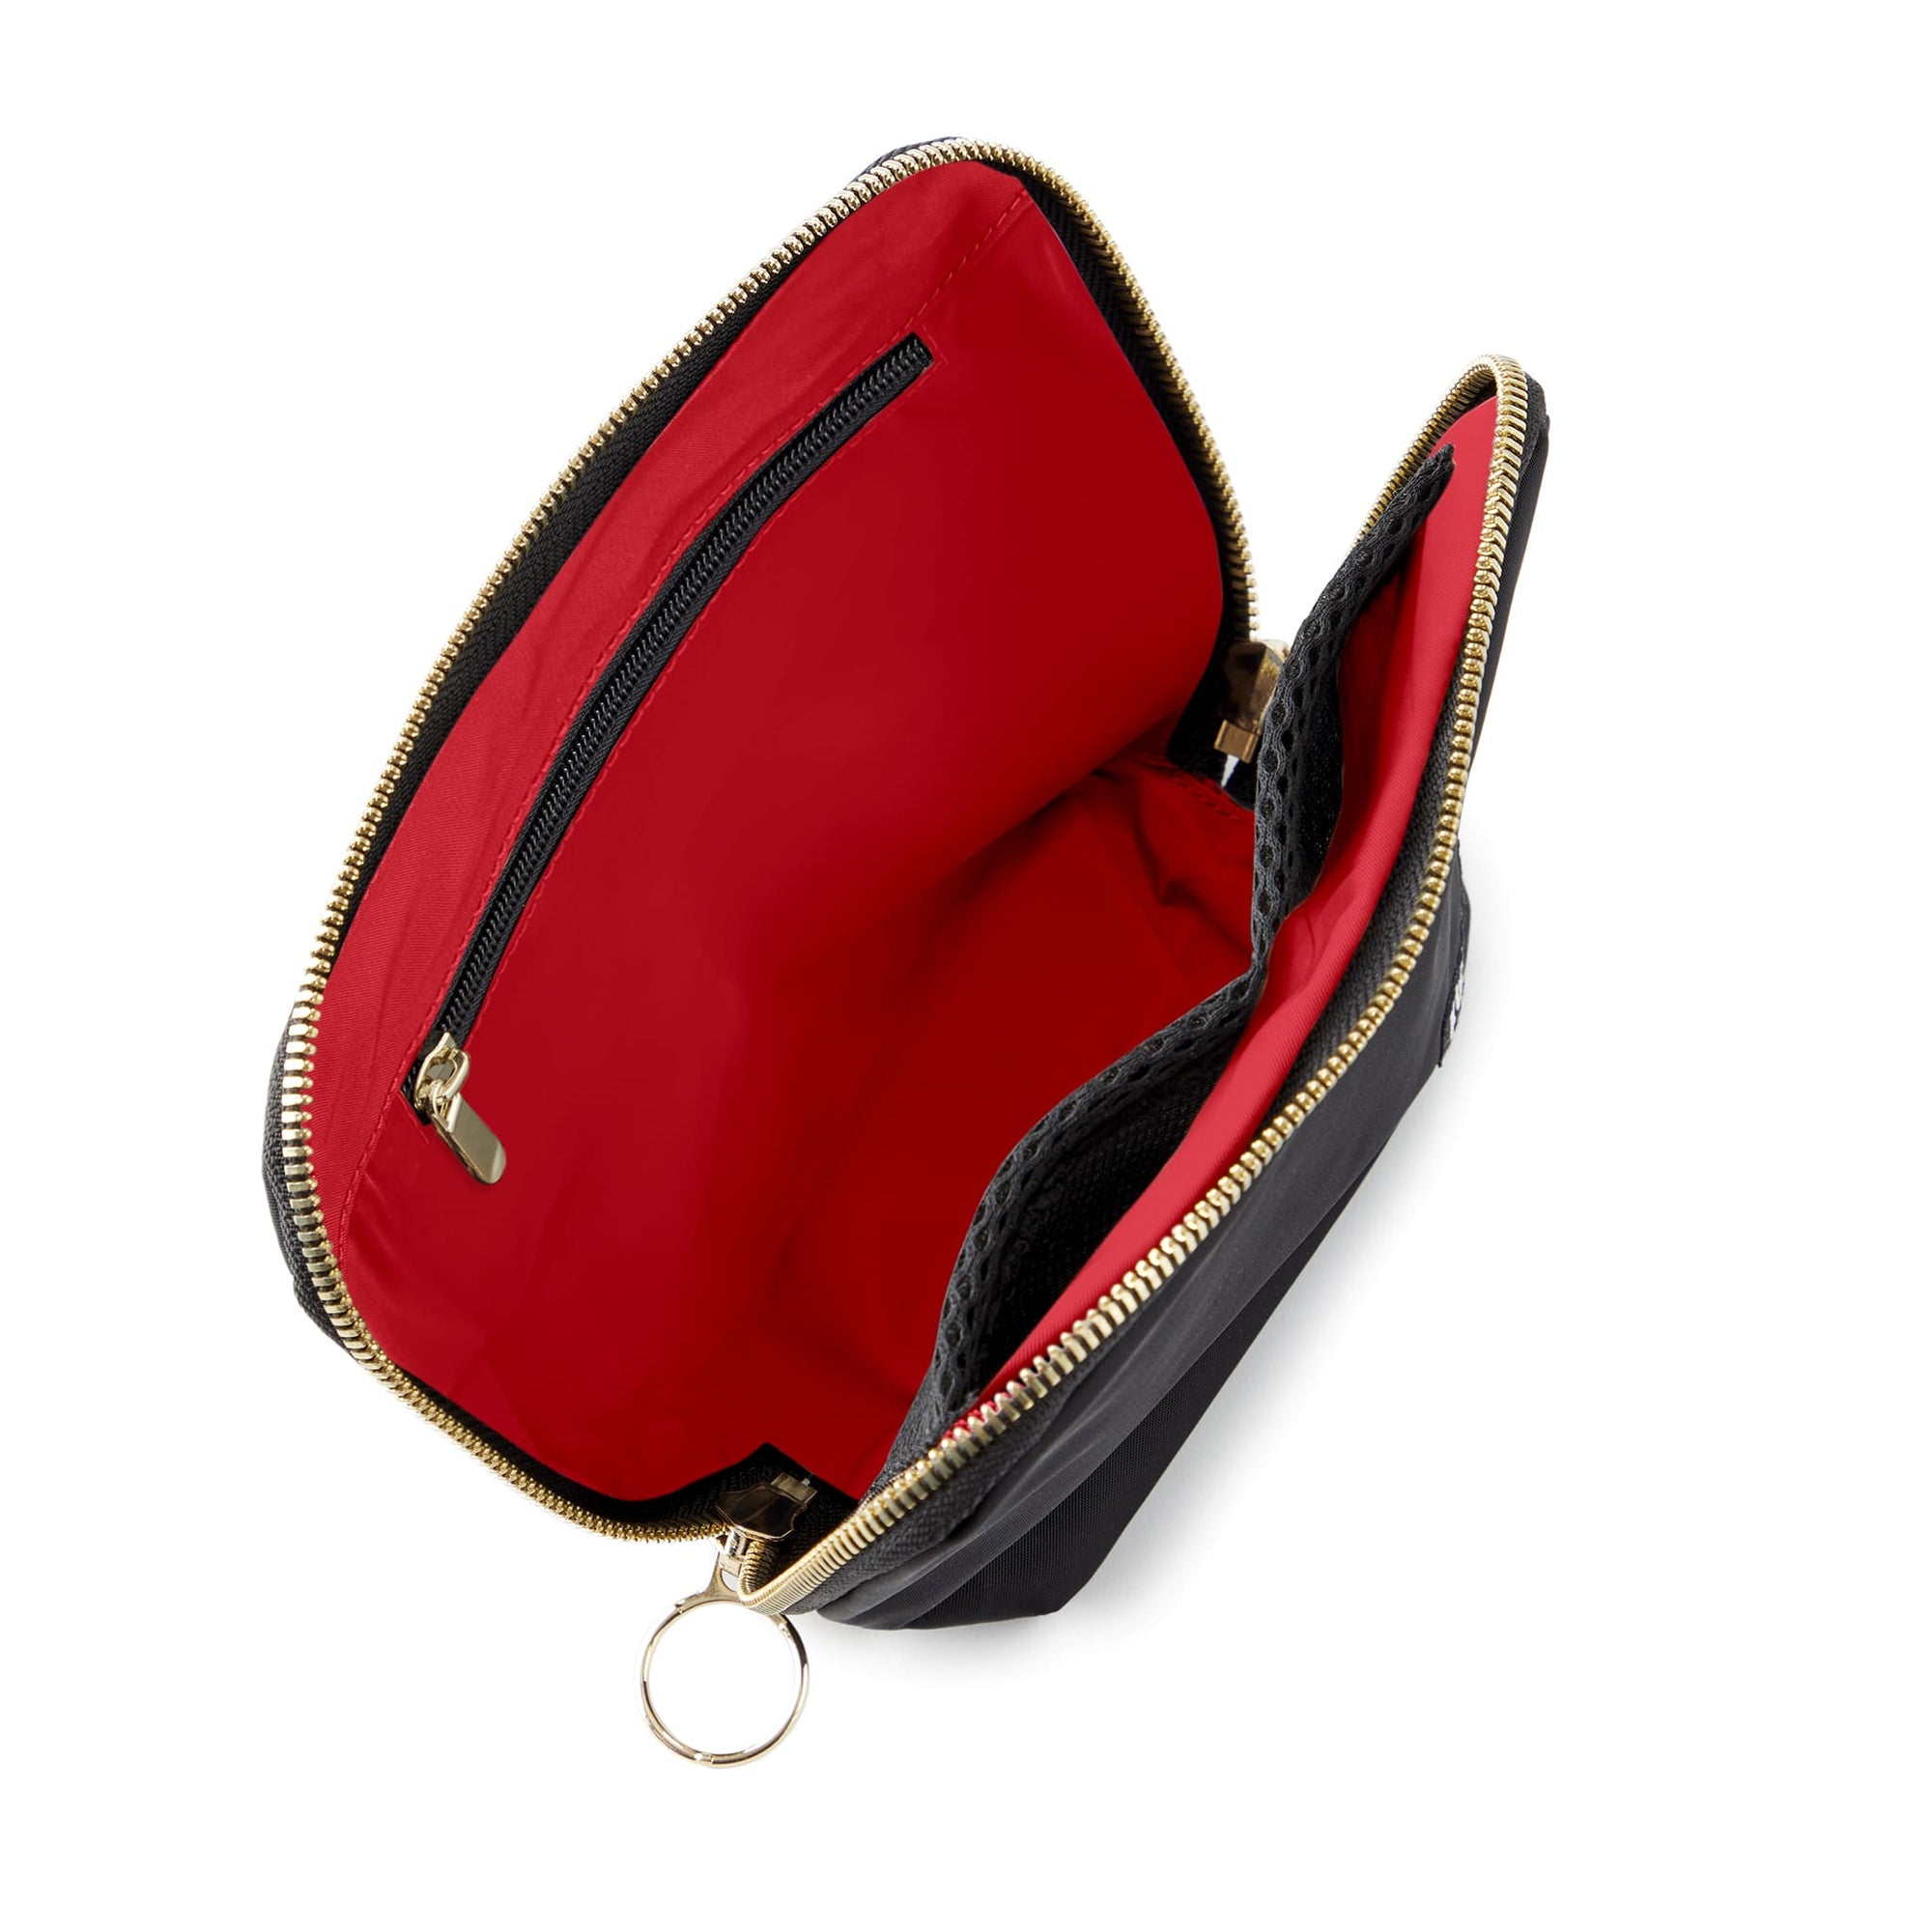 Small Makeup Bag with Multiple Compartments by Kusshi